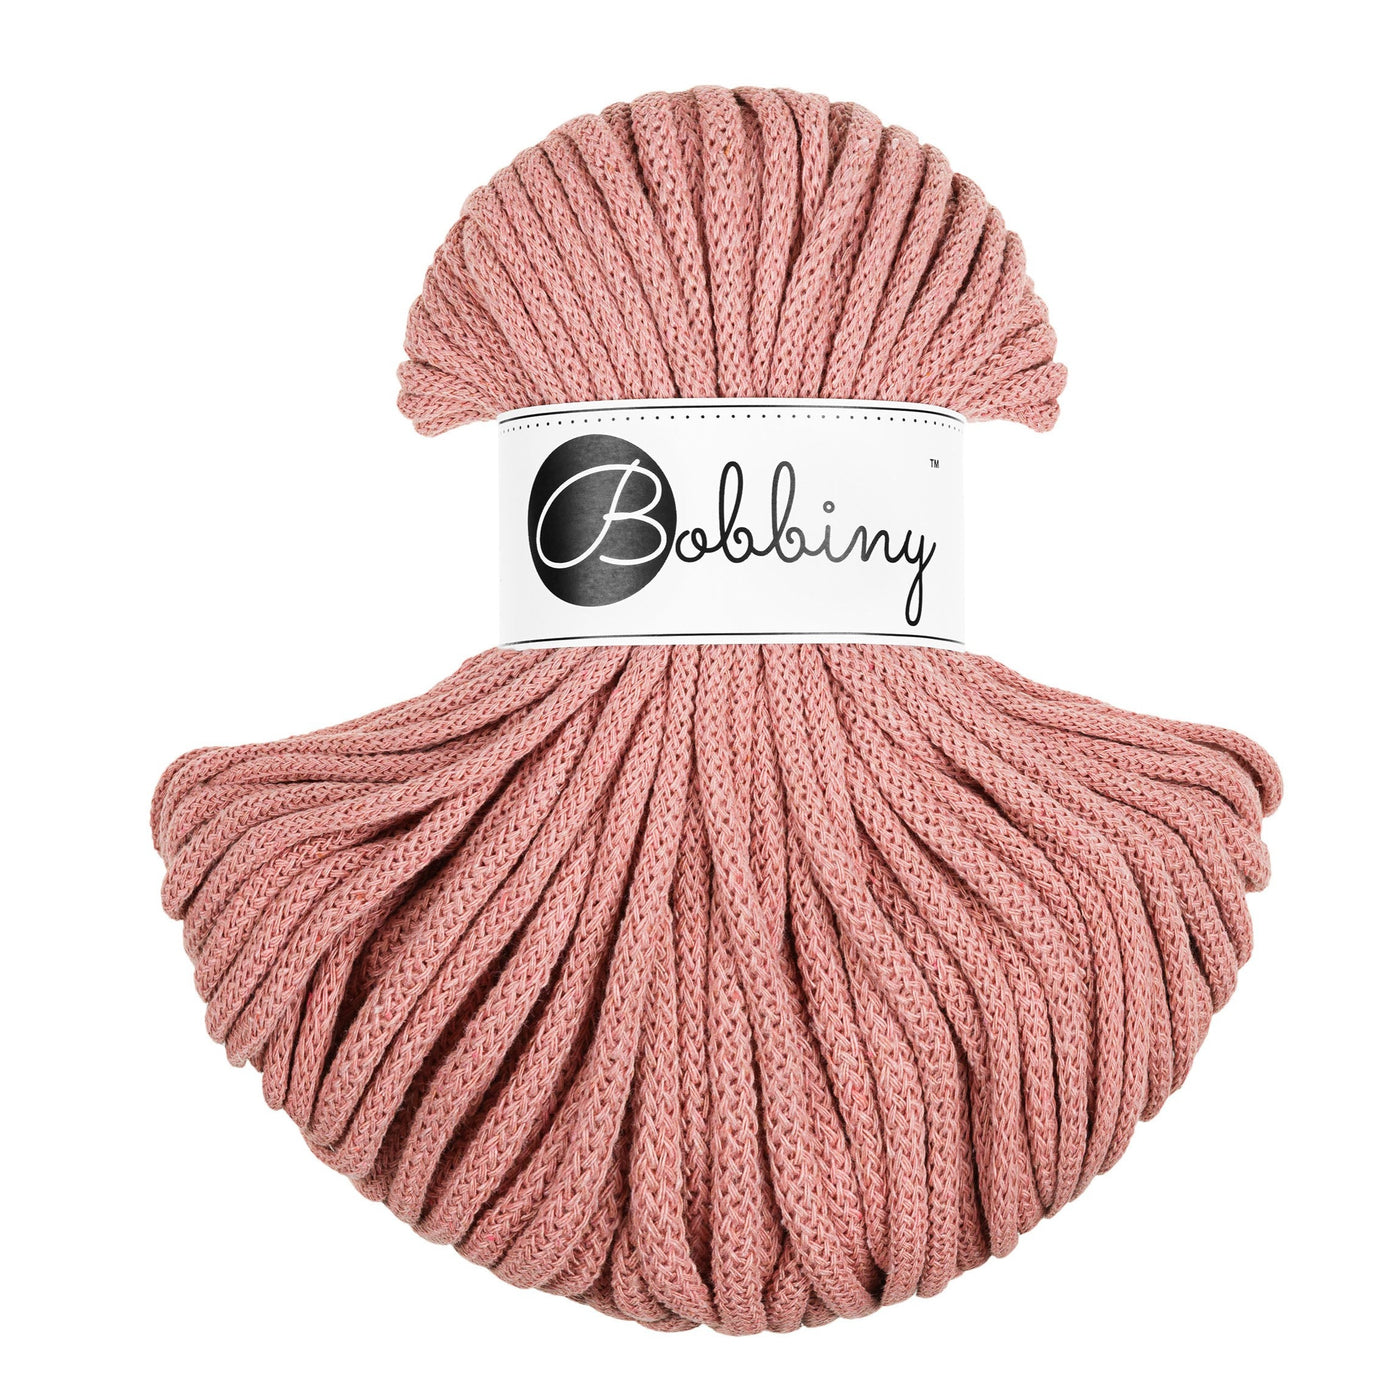 Bobbiny braided cord 5mm 50m in Blush pink shade